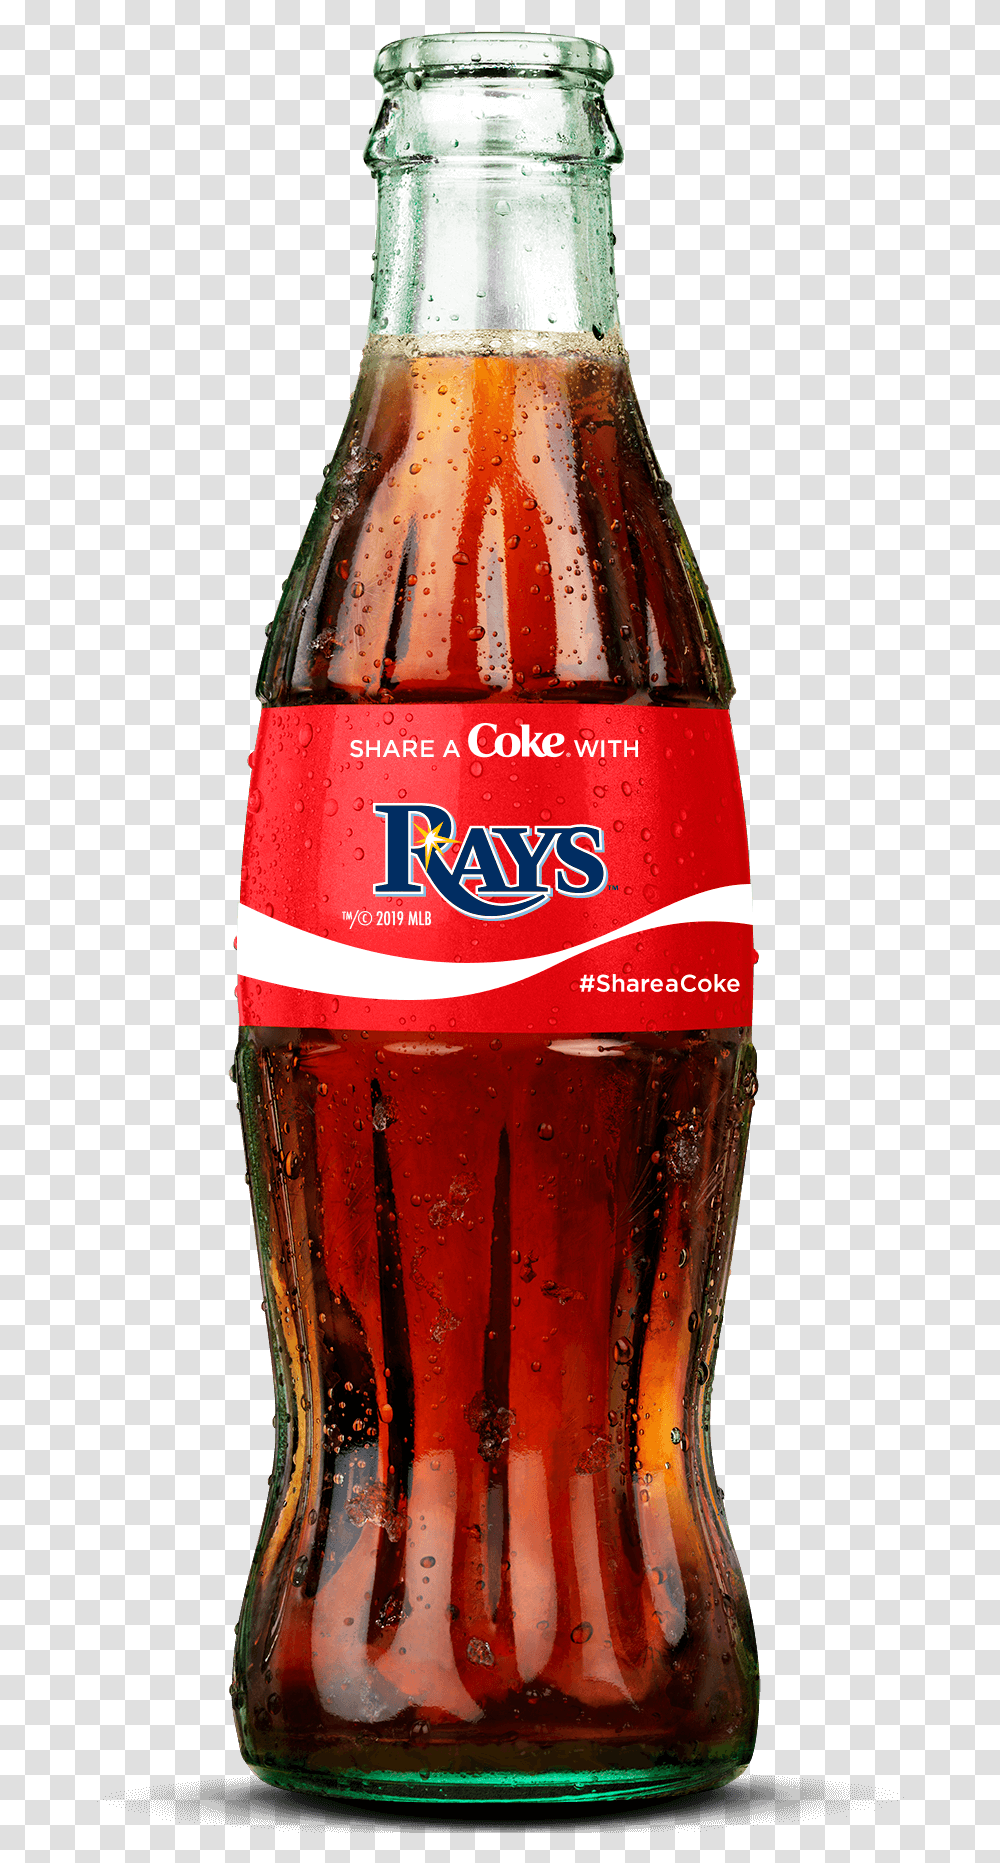 Tampa Bay Rays Brand Bottle Coca Cola Overwatch League, Soda, Beverage, Drink, Coke Transparent Png